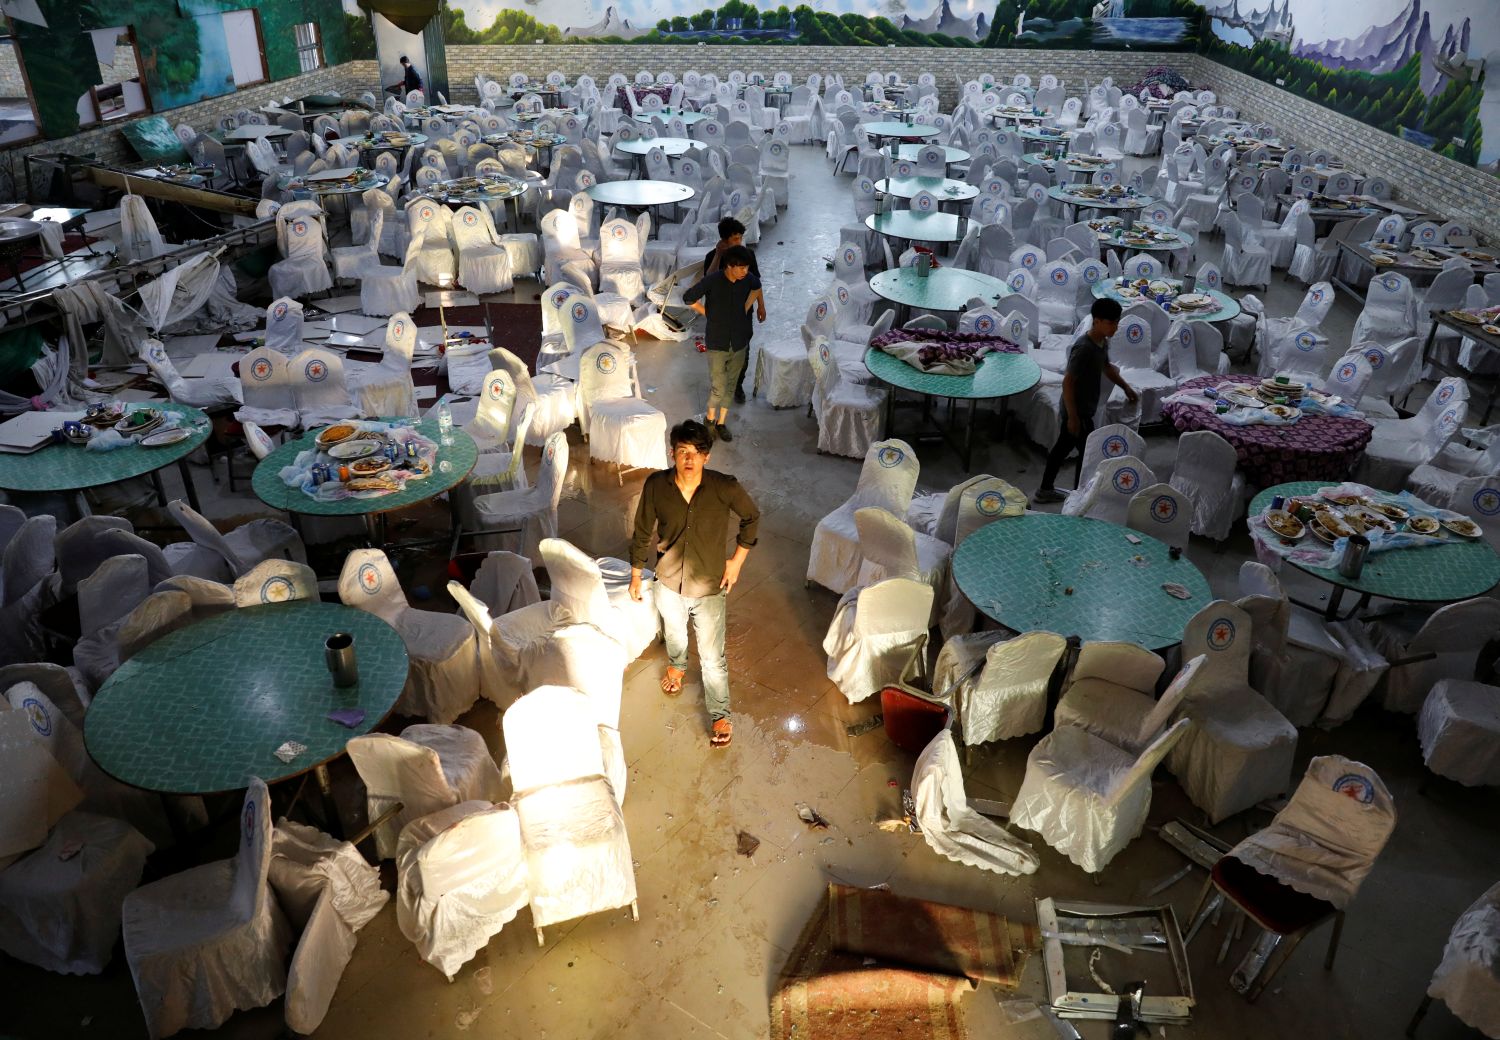 Workers inspect a damaged wedding hall after a blast in Kabul, Afghanistan August 18, 2019. REUTERS/Mohammad Ismail